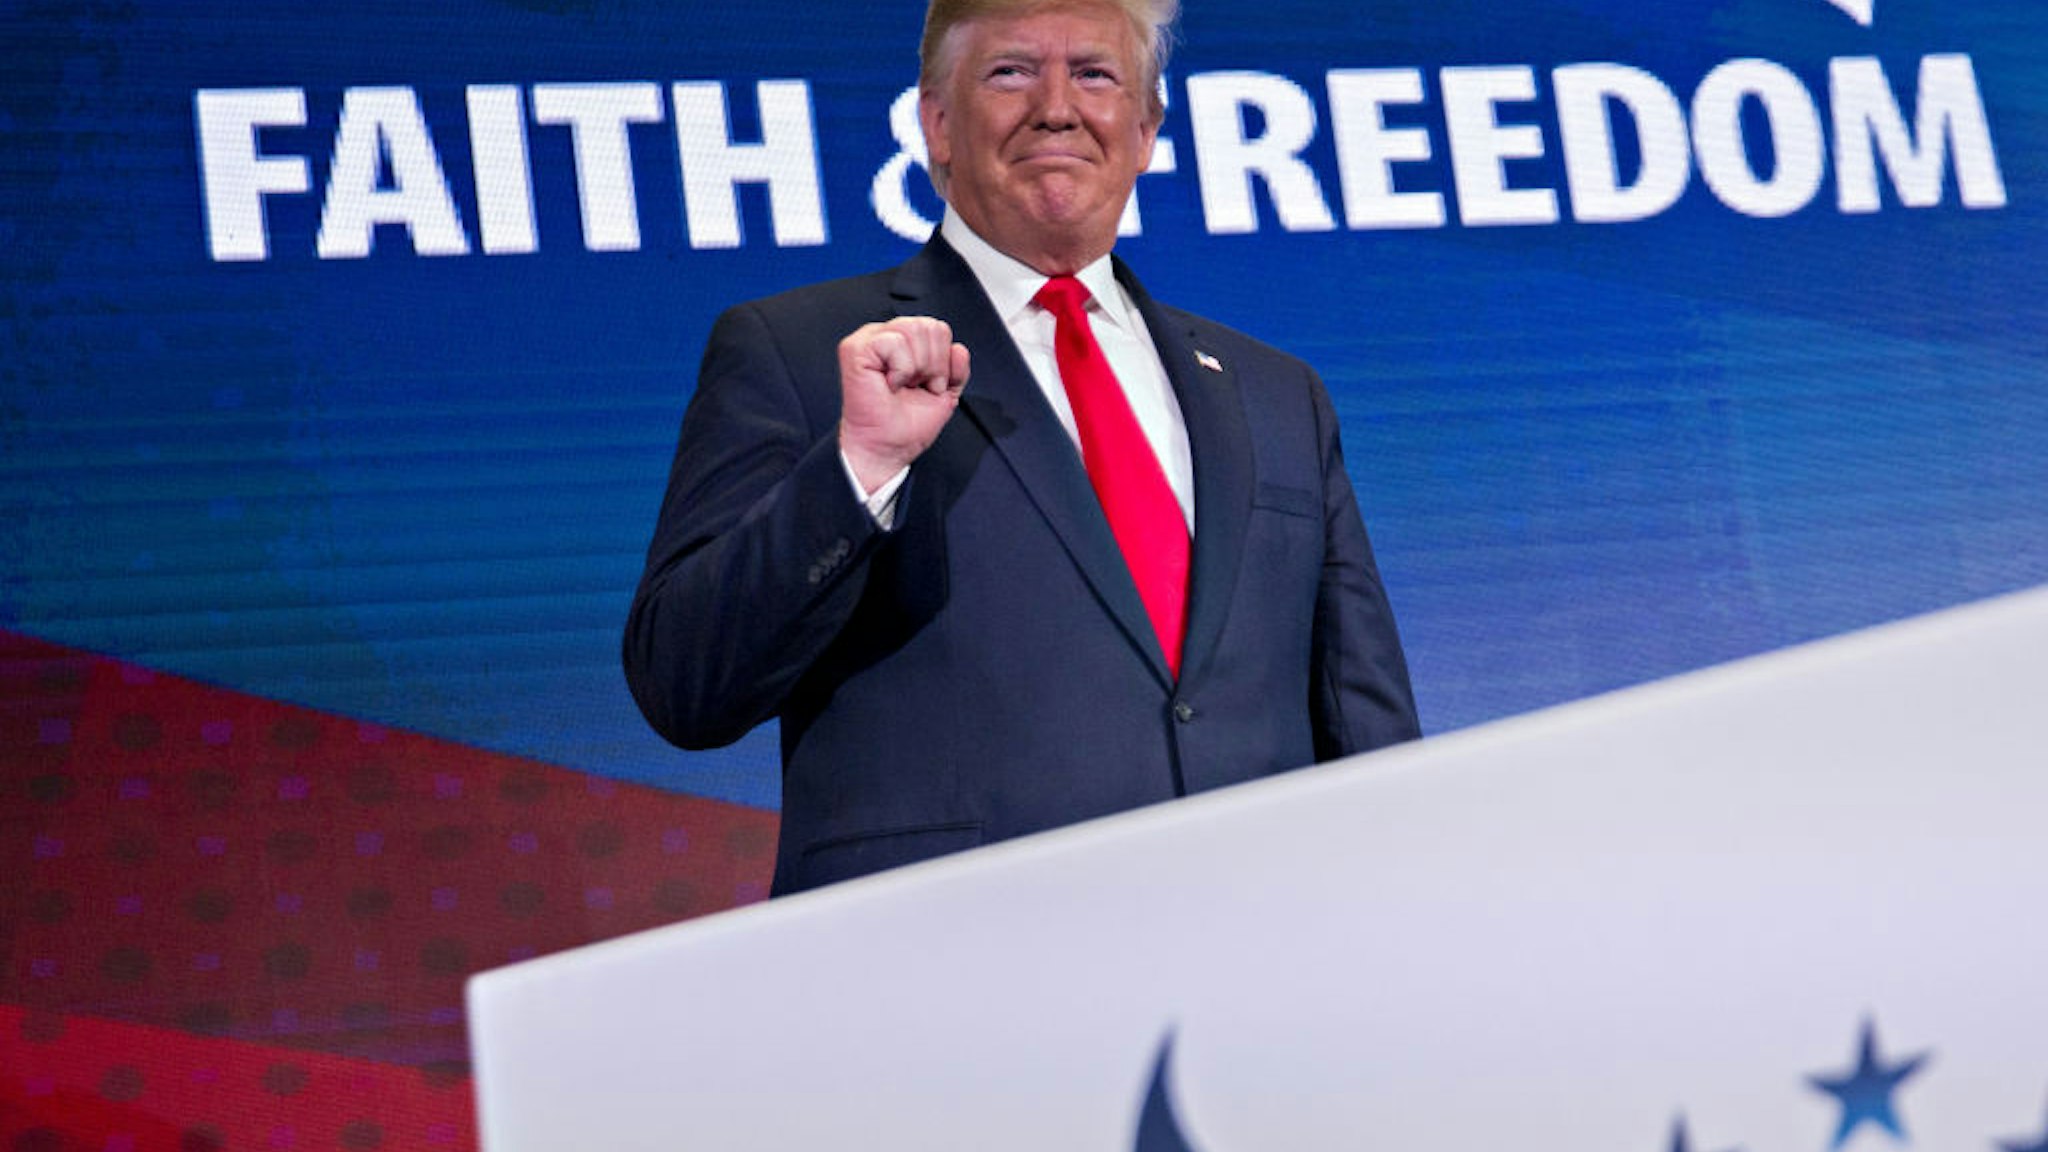 U.S. President Donald Trump gestures while arriving to speak during the Faith and Freedom Coalition's Road to Majority conference in Washington, D.C., U.S., on Wednesday, June 26, 2019.